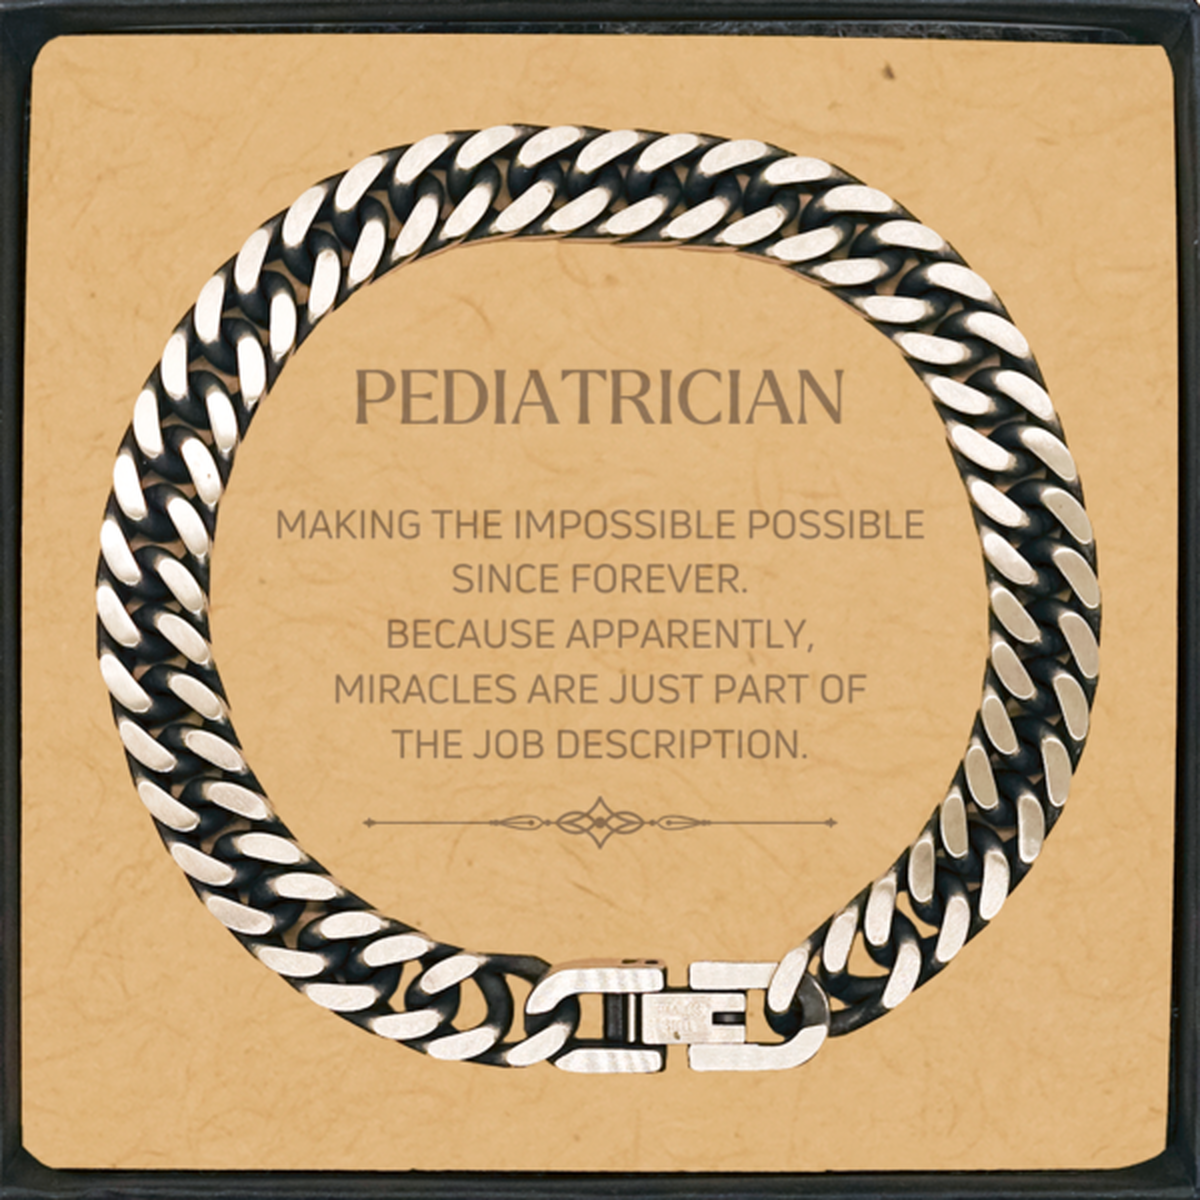 Funny Pediatrician Gifts, Miracles are just part of the job description, Inspirational Birthday Cuban Link Chain Bracelet For Pediatrician, Men, Women, Coworkers, Friends, Boss